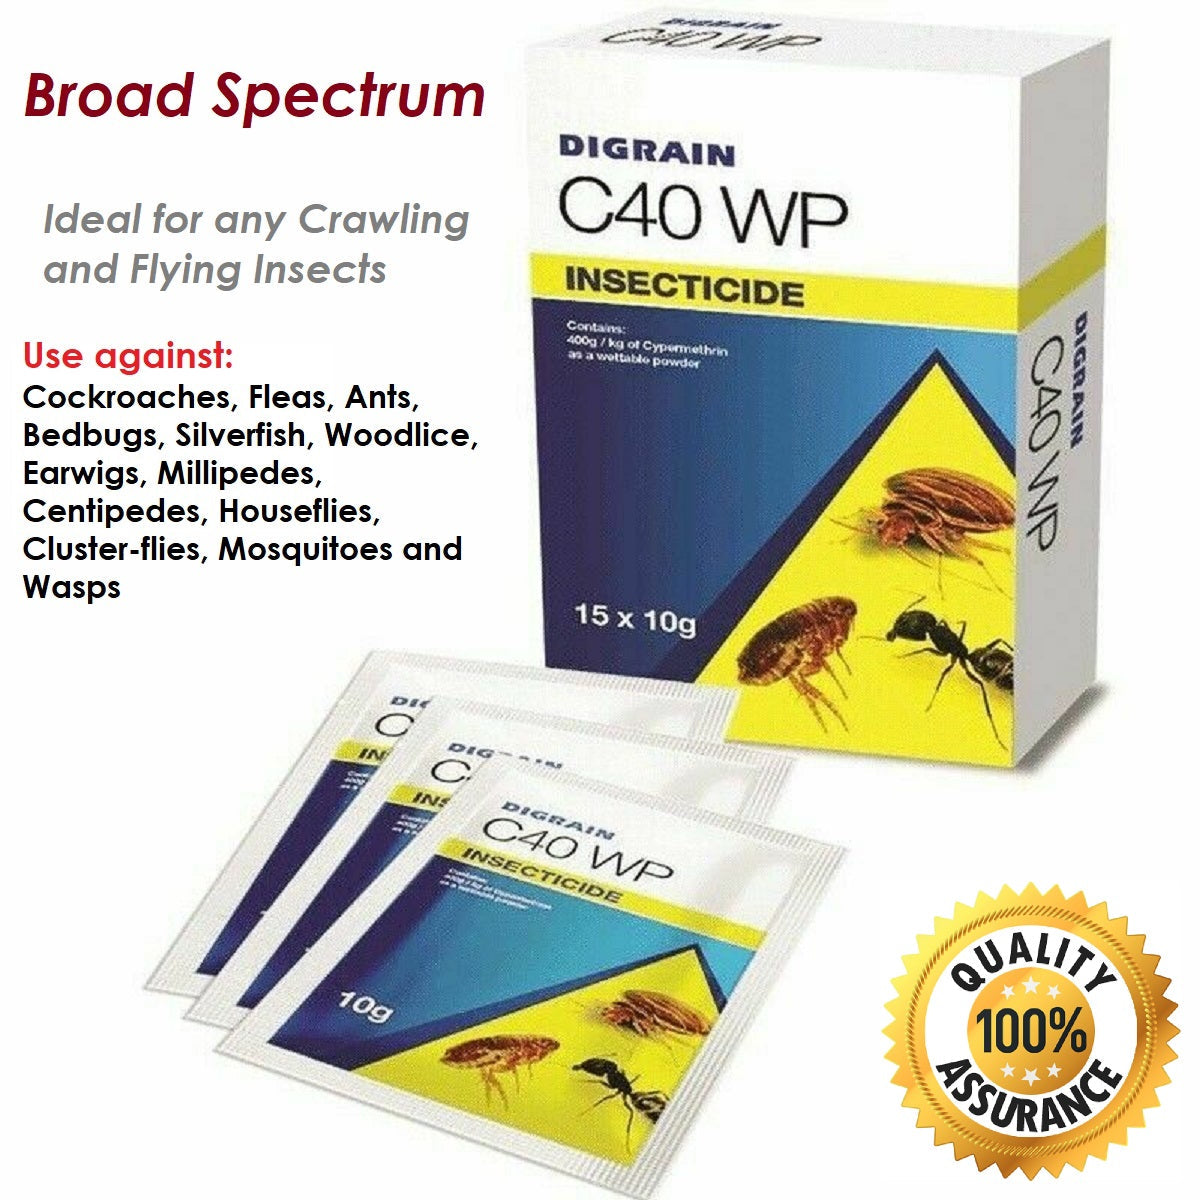 DIGRAIN C40 WP INSECTICIDE FOR WASPS, FLEAS, ANTS, BEDBUGS, COCKROACHES - All Insect Killer (15 x 10G) - Moth Control